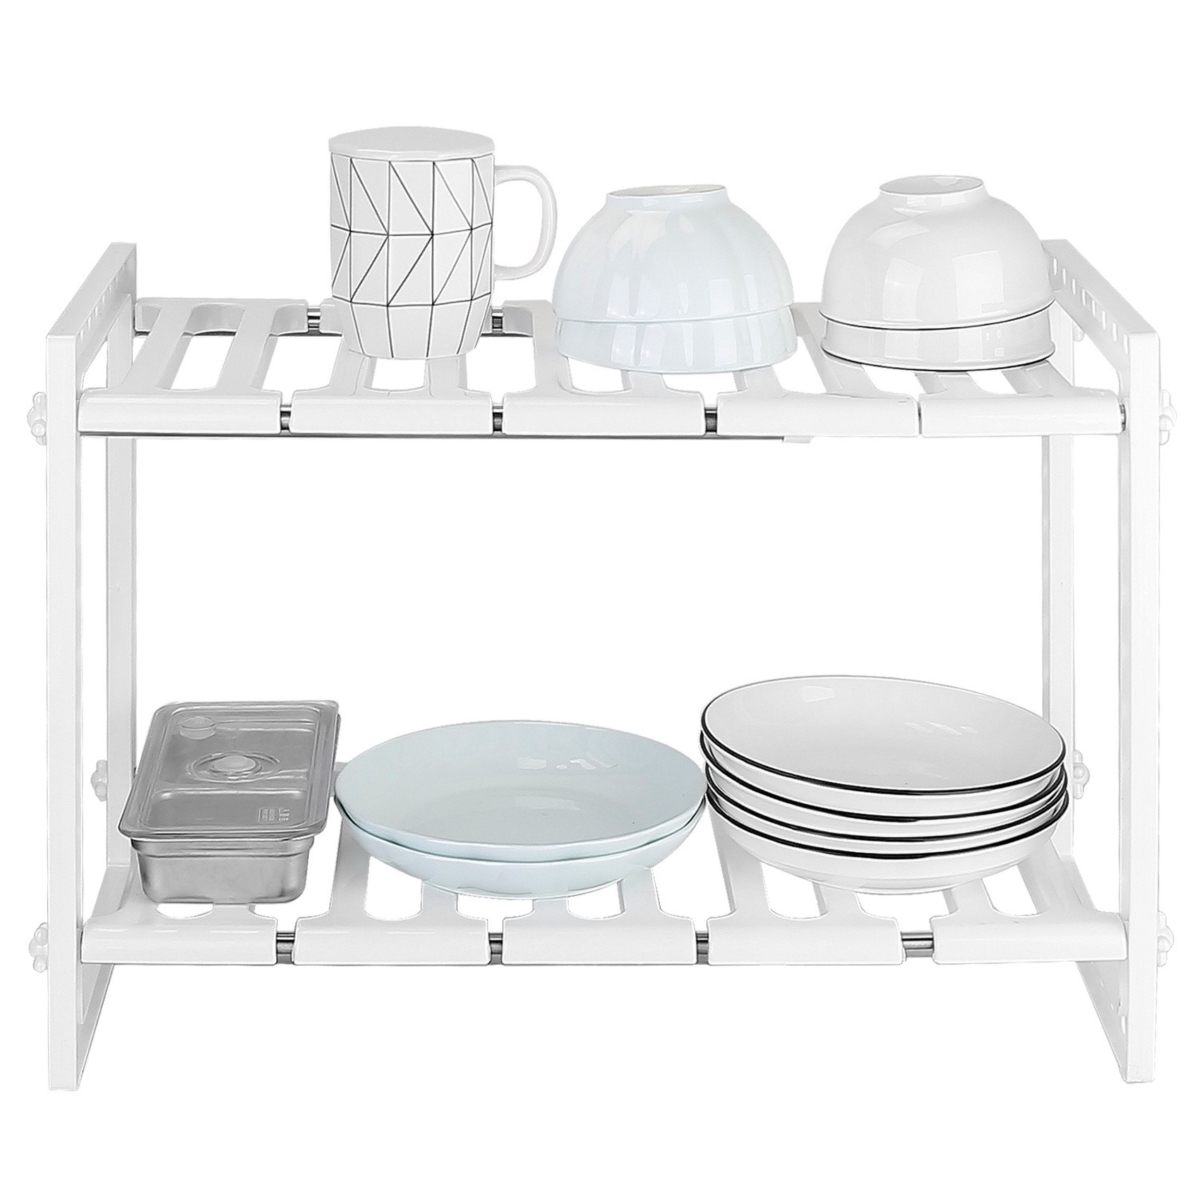 Picture of Fresh Fab Finds FFF-GPCT3132 2-Tier Under Sink Rack 22LB Max Load Retractable Kitchenware Storage Shelf